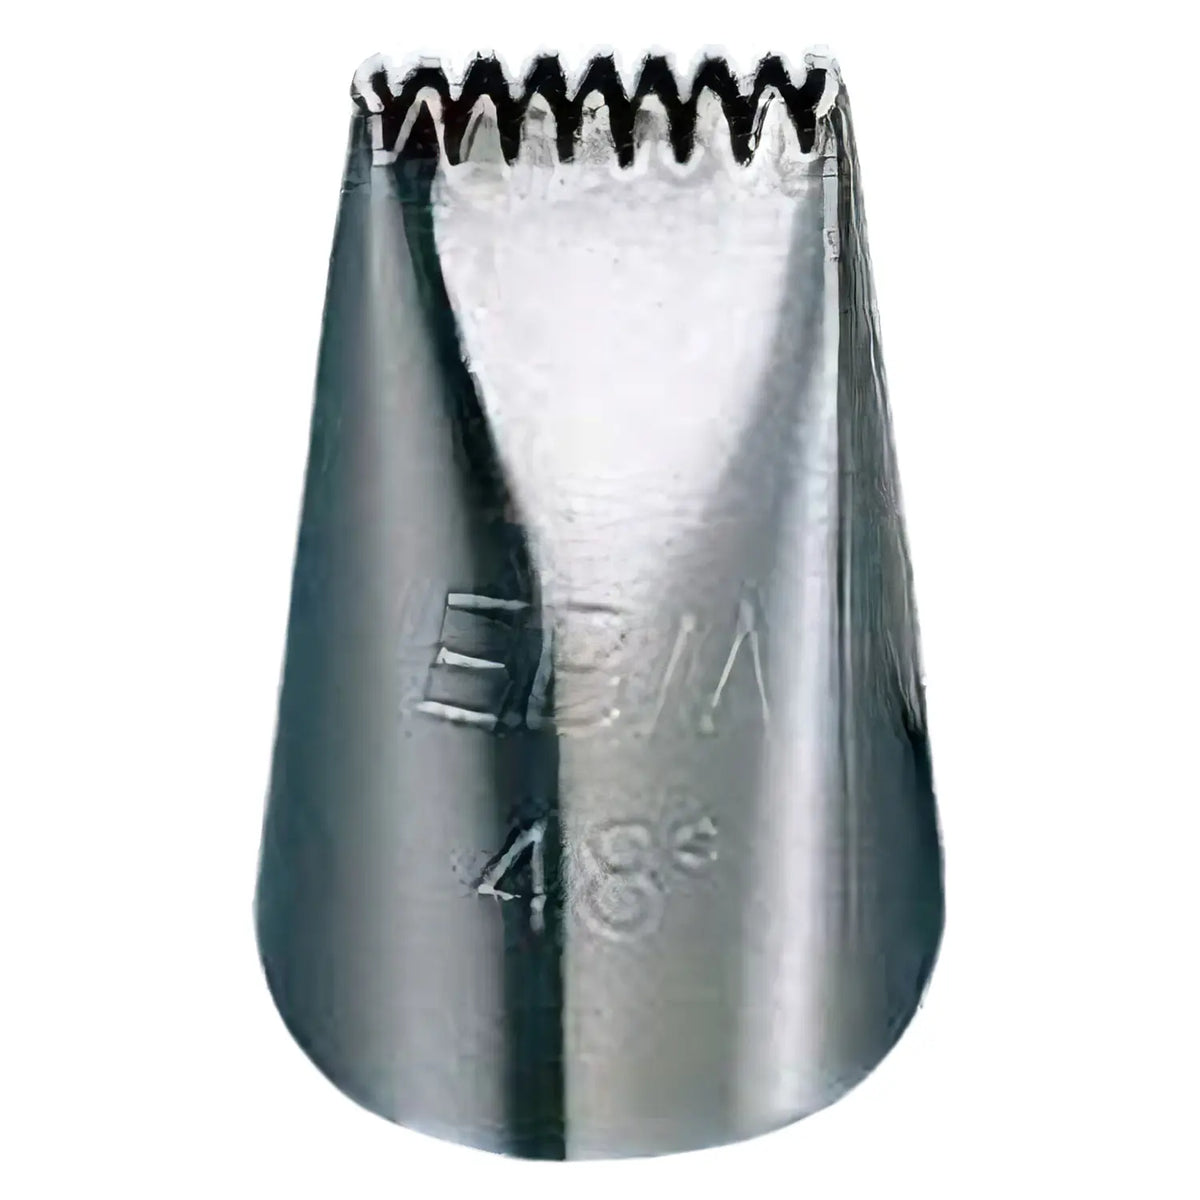 EBM Brass Piping Tip Serrated on Both Sides